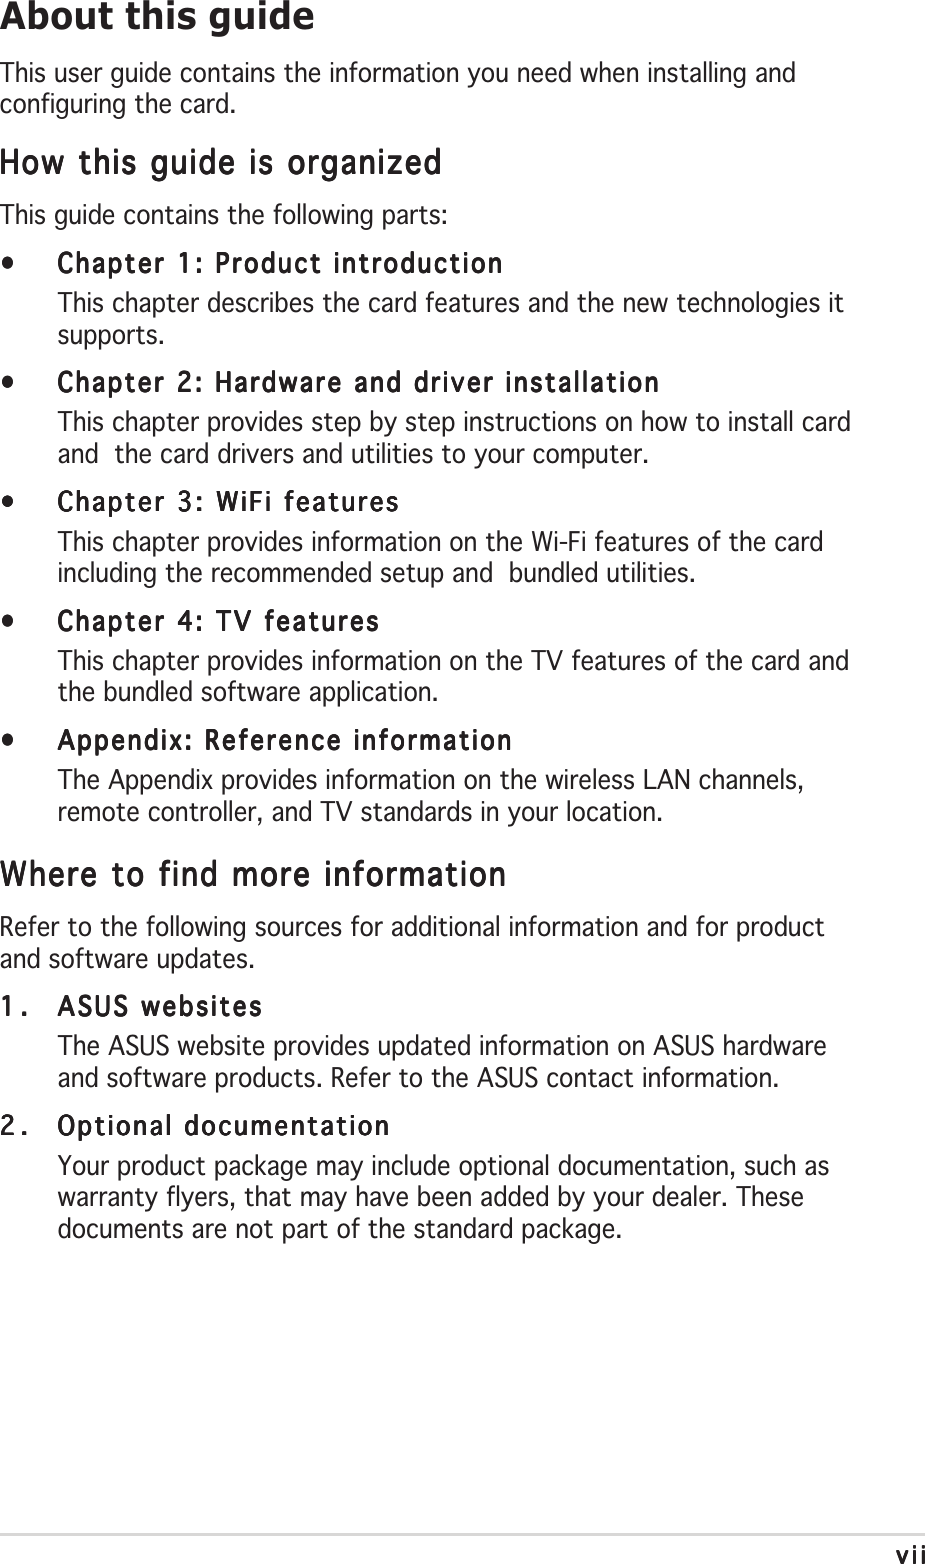 viiviiviiviiviiAbout this guideThis user guide contains the information you need when installing andconfiguring the card.How this guide is organizedHow this guide is organizedHow this guide is organizedHow this guide is organizedHow this guide is organizedThis guide contains the following parts:•••••Chapter 1: Product introductionChapter 1: Product introductionChapter 1: Product introductionChapter 1: Product introductionChapter 1: Product introductionThis chapter describes the card features and the new technologies itsupports.•••••Chapter 2: Hardware and driver installationChapter 2: Hardware and driver installationChapter 2: Hardware and driver installationChapter 2: Hardware and driver installationChapter 2: Hardware and driver installationThis chapter provides step by step instructions on how to install cardand  the card drivers and utilities to your computer.•••••Chapter 3: WiFi featuresChapter 3: WiFi featuresChapter 3: WiFi featuresChapter 3: WiFi featuresChapter 3: WiFi featuresThis chapter provides information on the Wi-Fi features of the cardincluding the recommended setup and  bundled utilities.•••••Chapter 4: TV featuresChapter 4: TV featuresChapter 4: TV featuresChapter 4: TV featuresChapter 4: TV featuresThis chapter provides information on the TV features of the card andthe bundled software application.•••••Appendix: Reference informationAppendix: Reference informationAppendix: Reference informationAppendix: Reference informationAppendix: Reference informationThe Appendix provides information on the wireless LAN channels,remote controller, and TV standards in your location.Where to find more informationWhere to find more informationWhere to find more informationWhere to find more informationWhere to find more informationRefer to the following sources for additional information and for productand software updates.1.1.1.1.1. ASUS websitesASUS websitesASUS websitesASUS websitesASUS websitesThe ASUS website provides updated information on ASUS hardwareand software products. Refer to the ASUS contact information.2.2.2.2.2. Optional documentationOptional documentationOptional documentationOptional documentationOptional documentationYour product package may include optional documentation, such aswarranty flyers, that may have been added by your dealer. Thesedocuments are not part of the standard package.